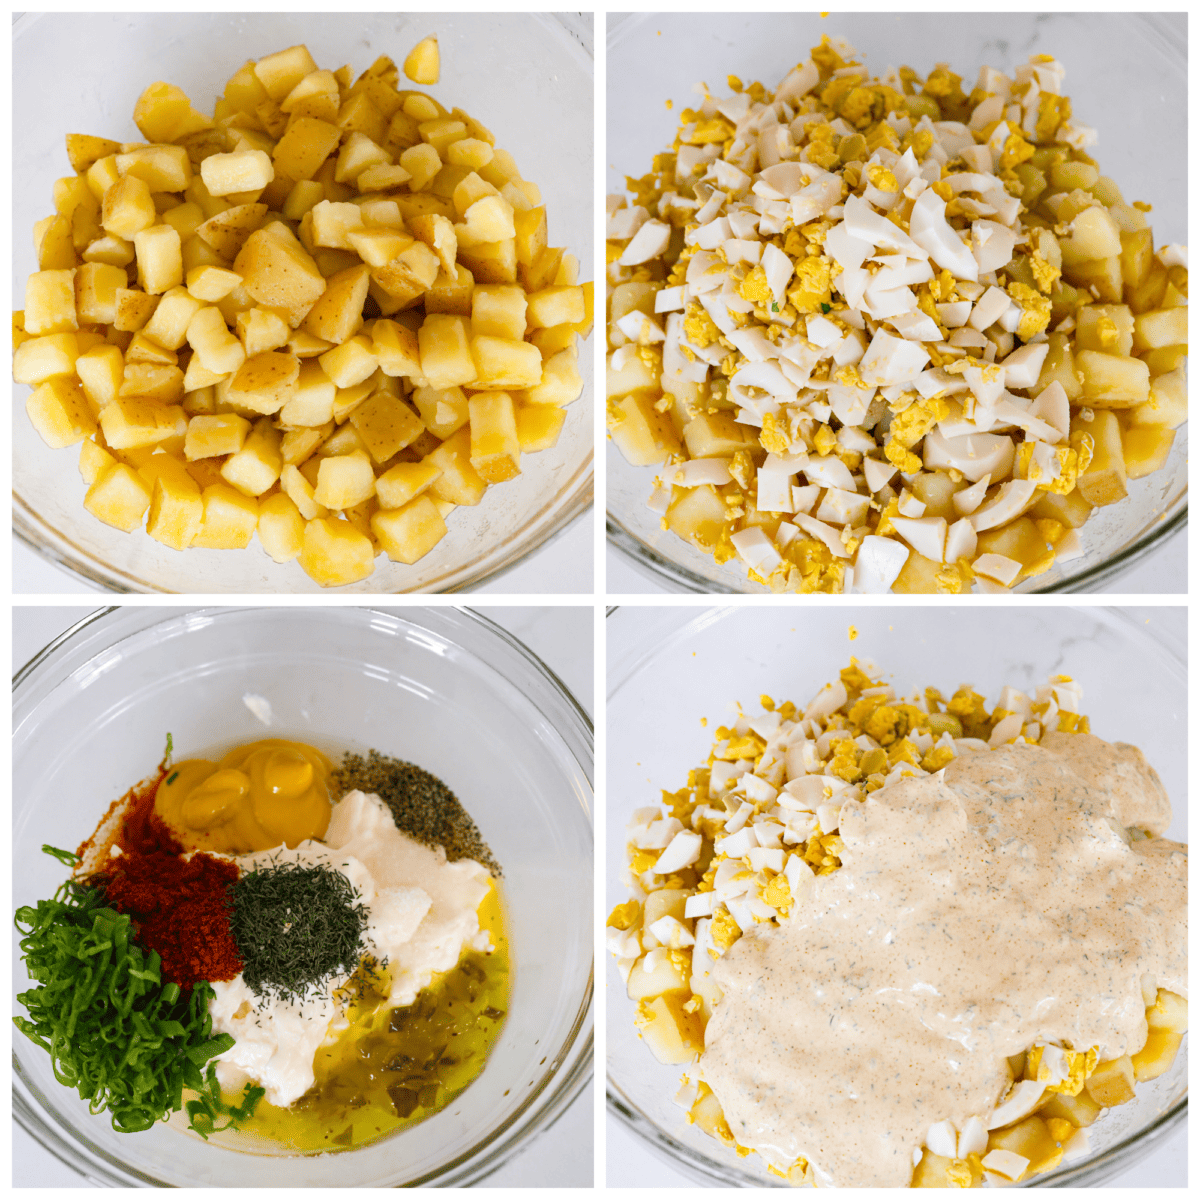 4-photo collage of the potatoes and hard boiled eggs being mixed together with the mayo dressing.